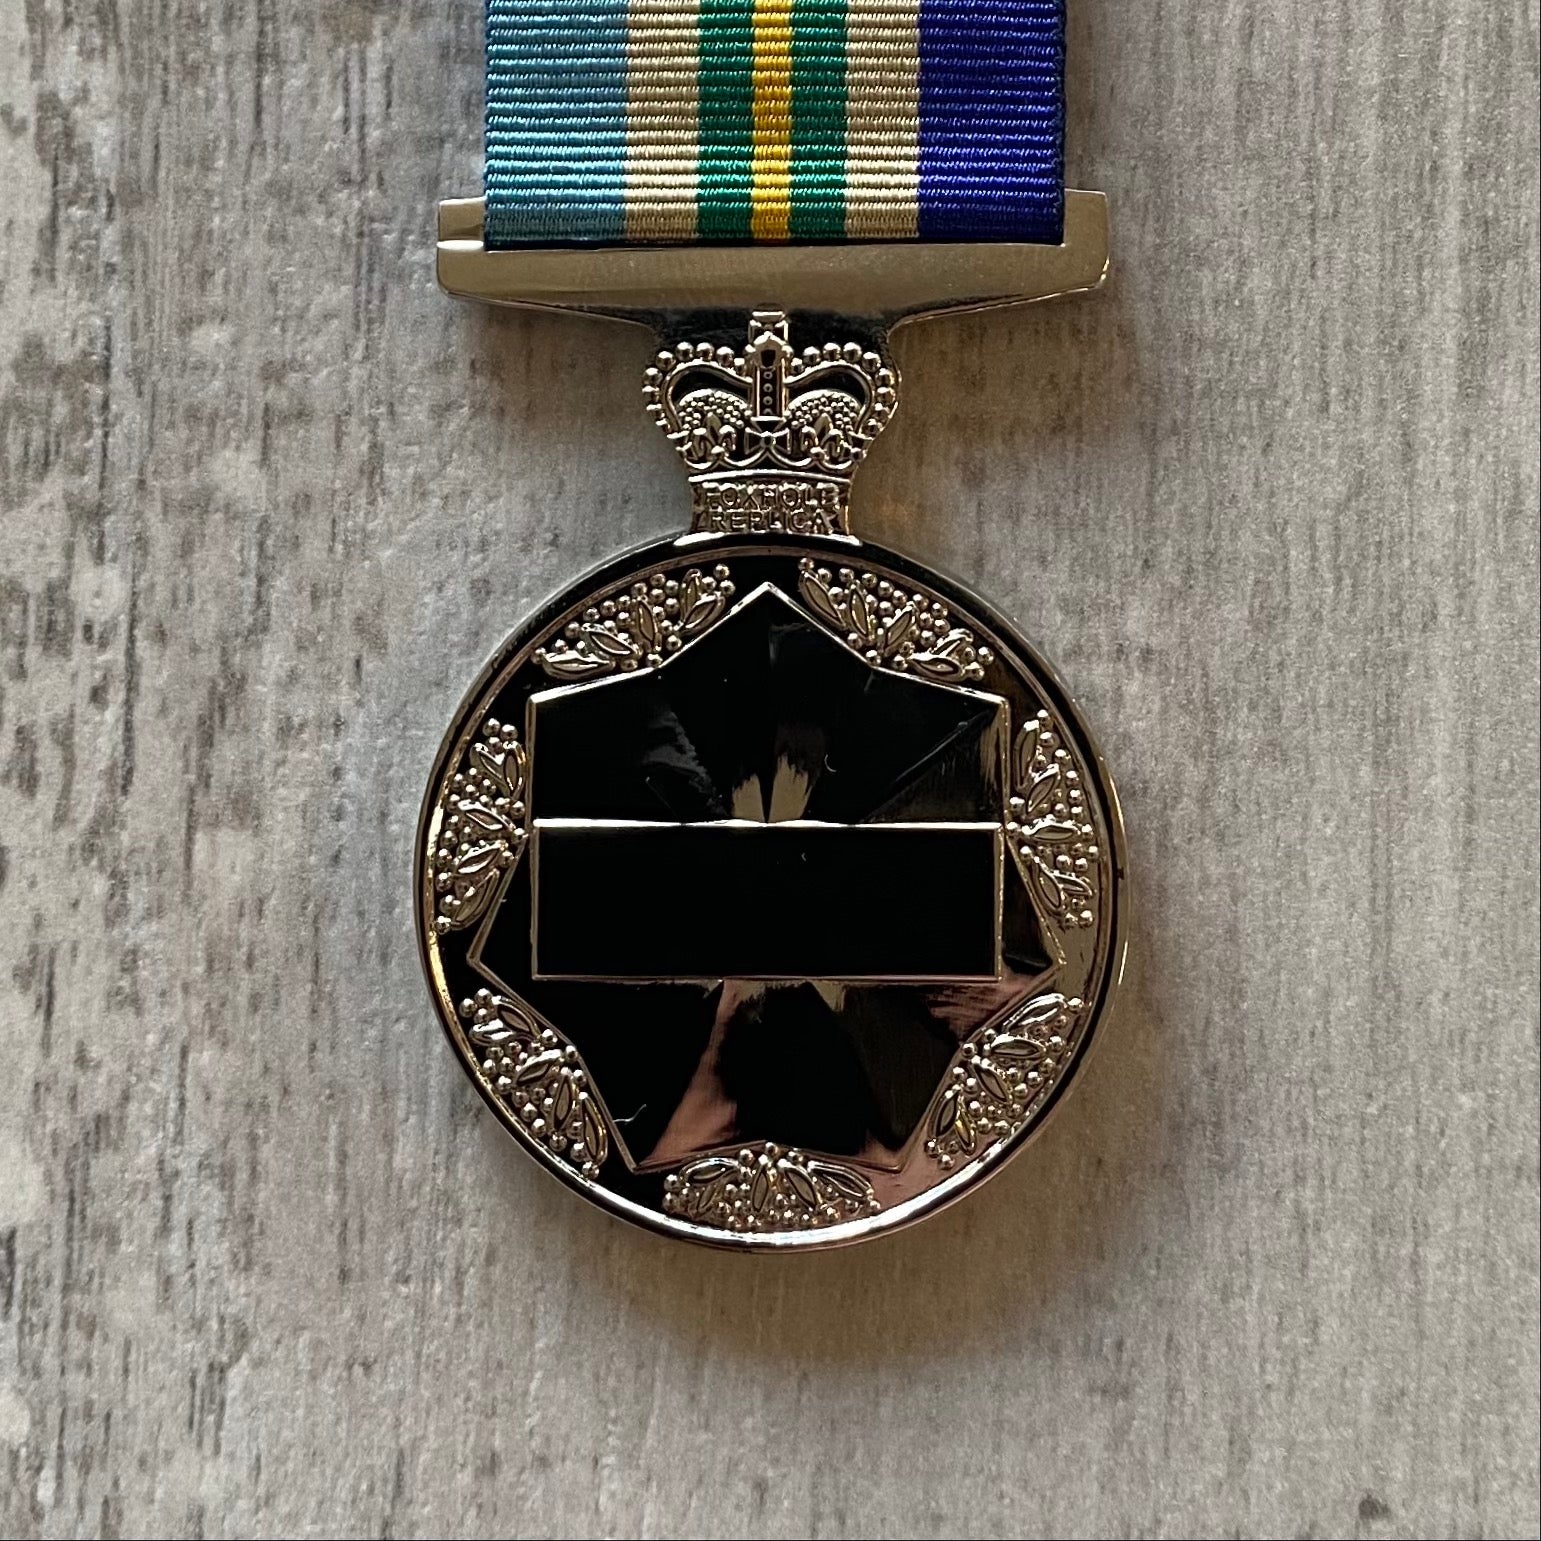 Australian Service Medal 1945-1975 - Foxhole Medals